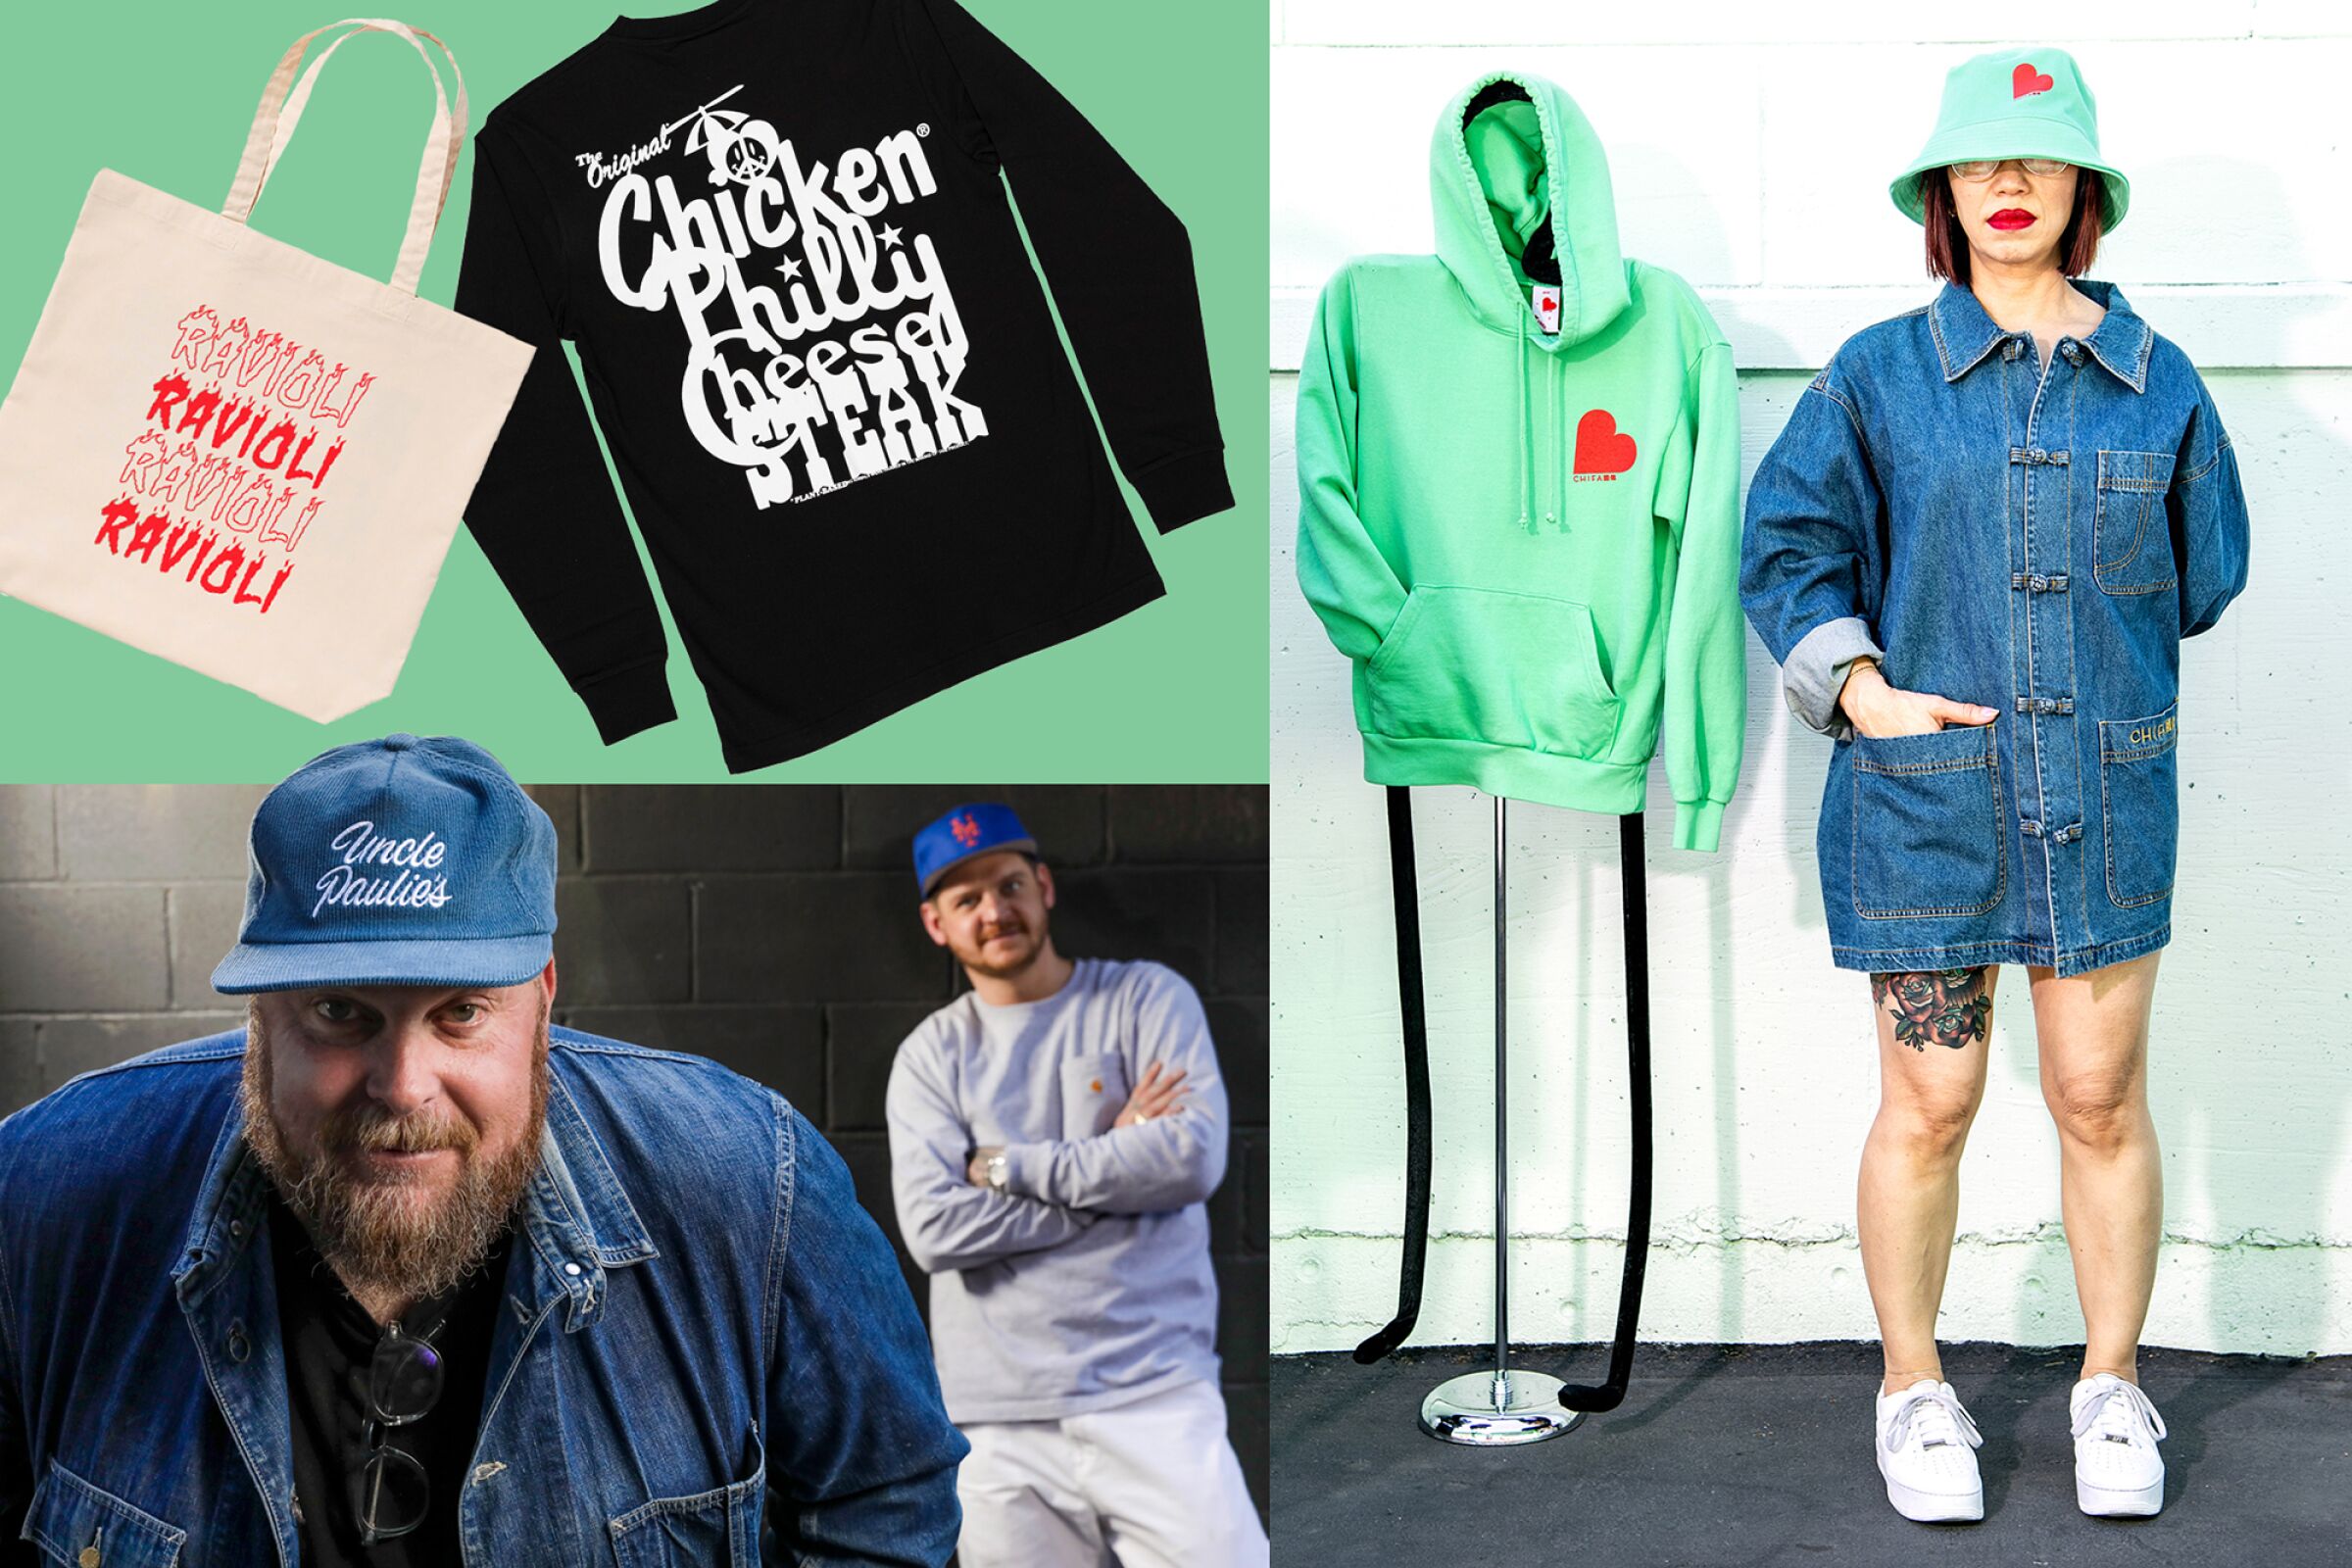 Food-inspired items including a Philly cheesesteak sweatshirt, ravioli totebag, a green hoodie and bucket hat with red heart